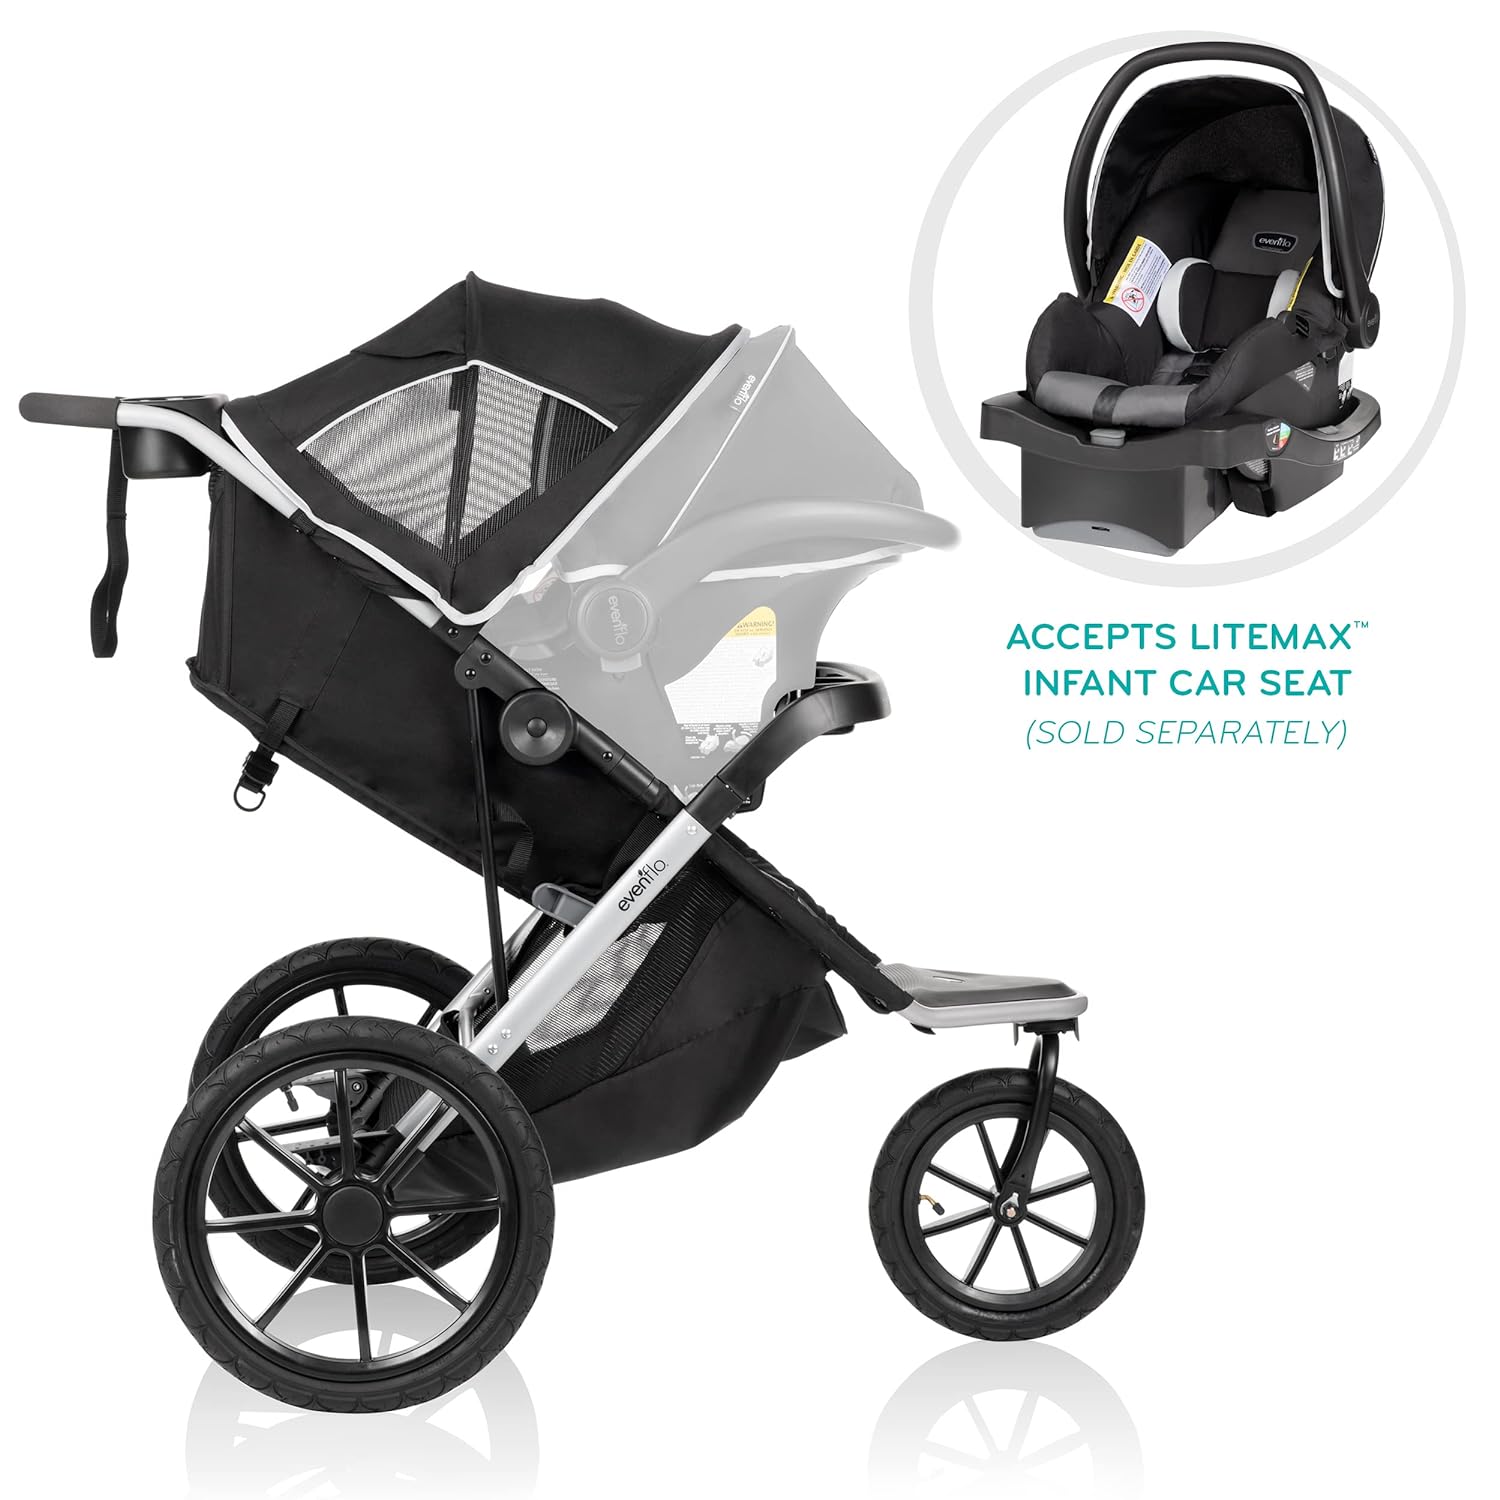 Evenflo Victory Plus Jogger Stroller, Compact, Lightweight, Self-Standing, Ample Storage, Large Tires, Swivel Wheel, Full Coverage Canopy, Multi-Reclining Seat, Compatible With LiteMax Infant Car Seat - image 5 of 11